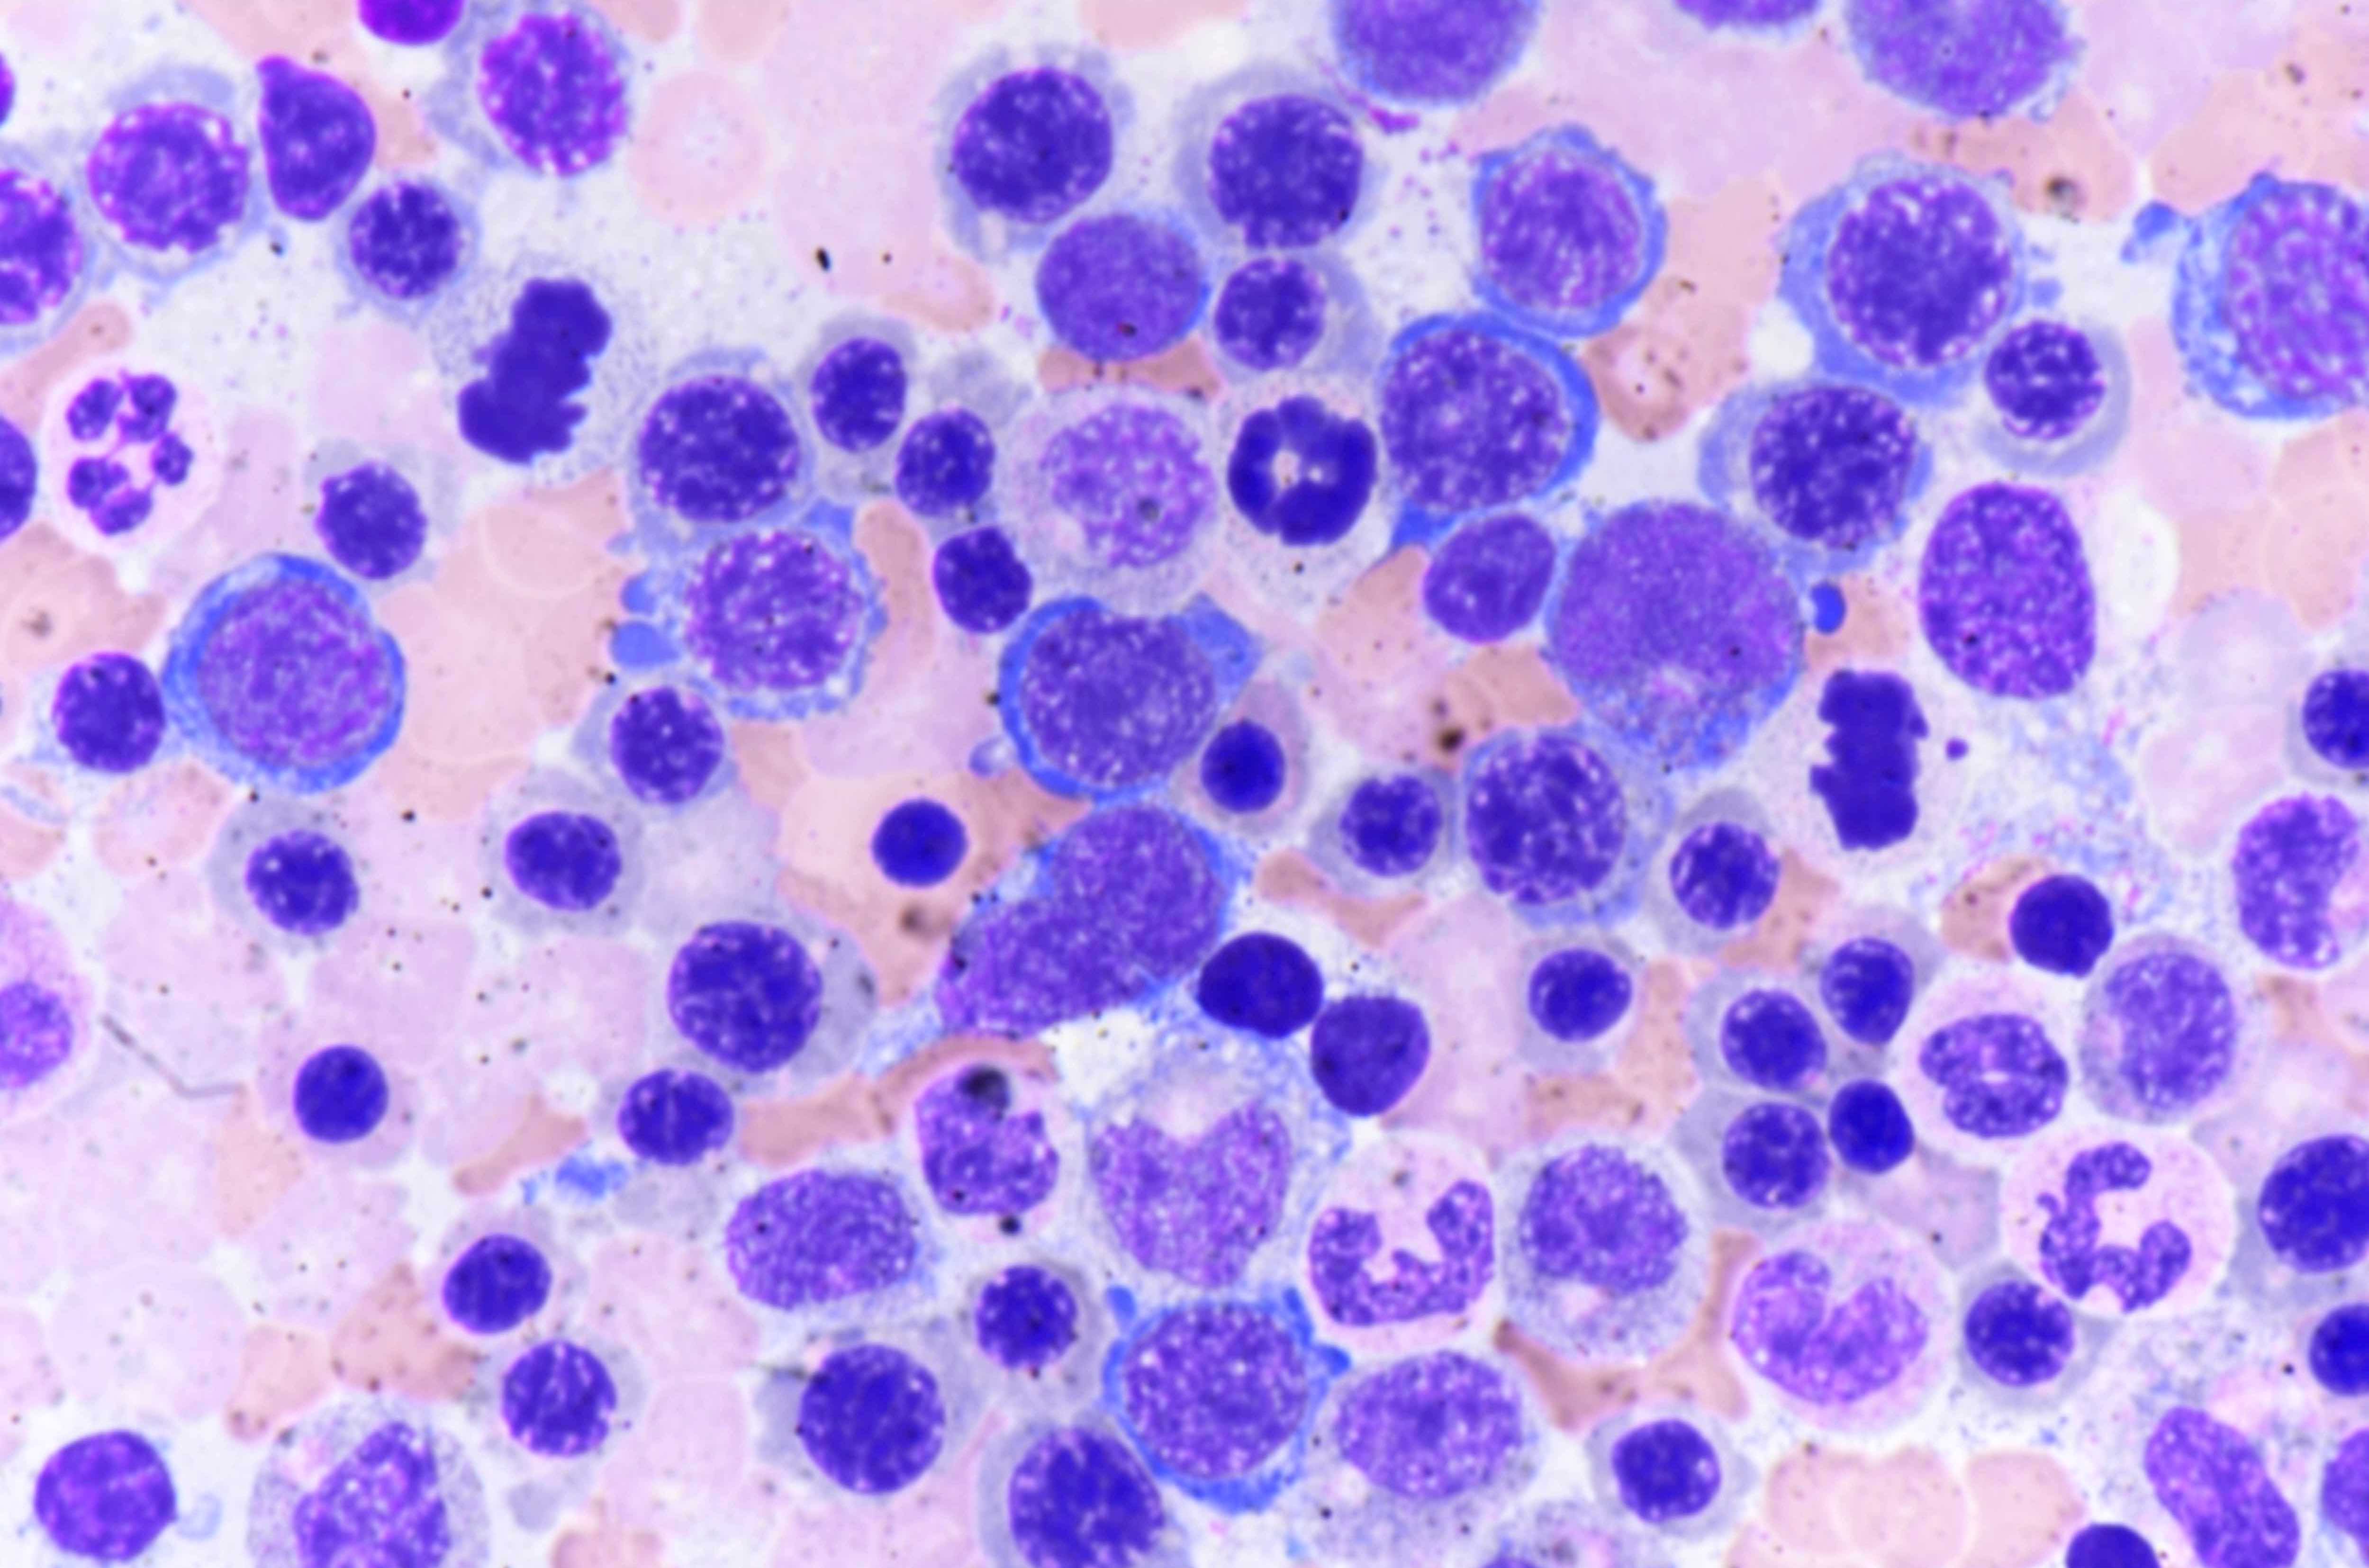 Frequent mitoses and neutrophil hypersegmentation